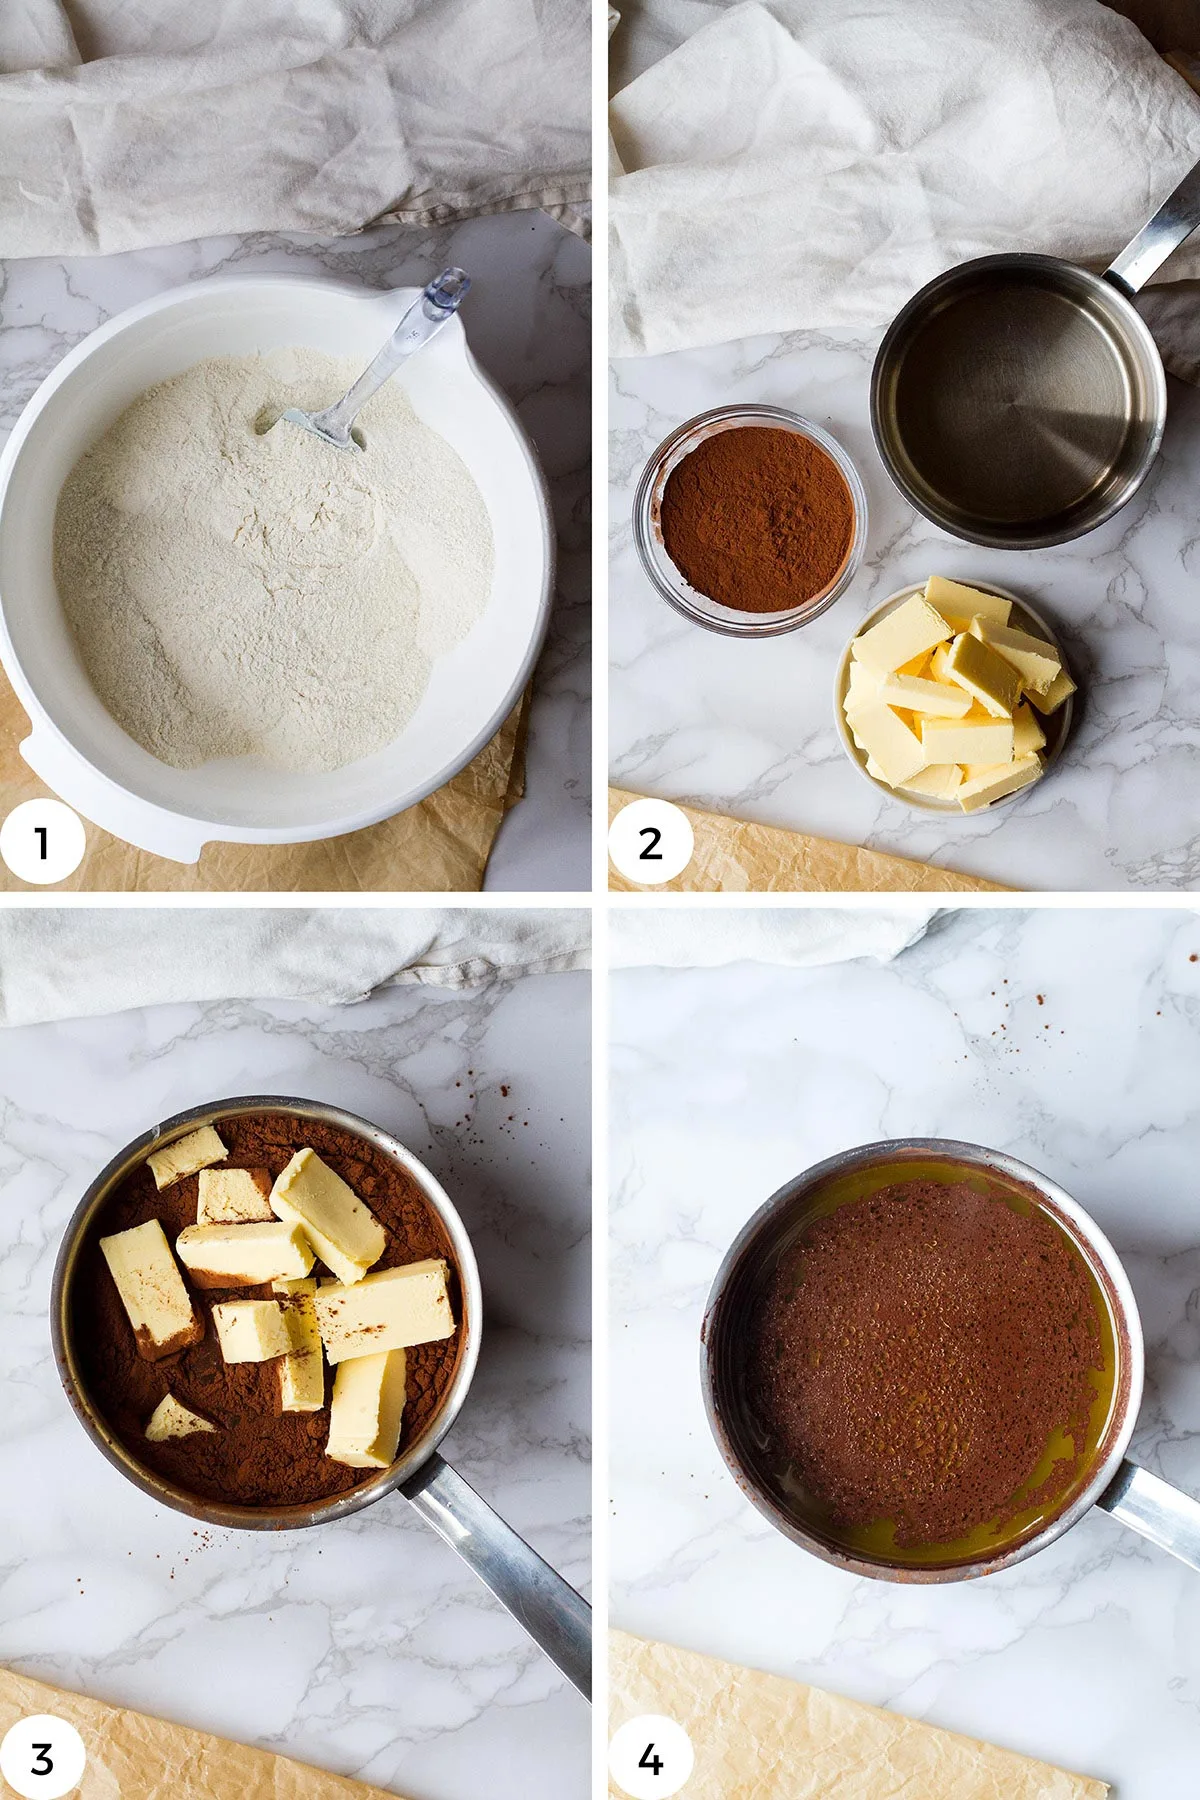 Steps to make chocolate butter mixture.